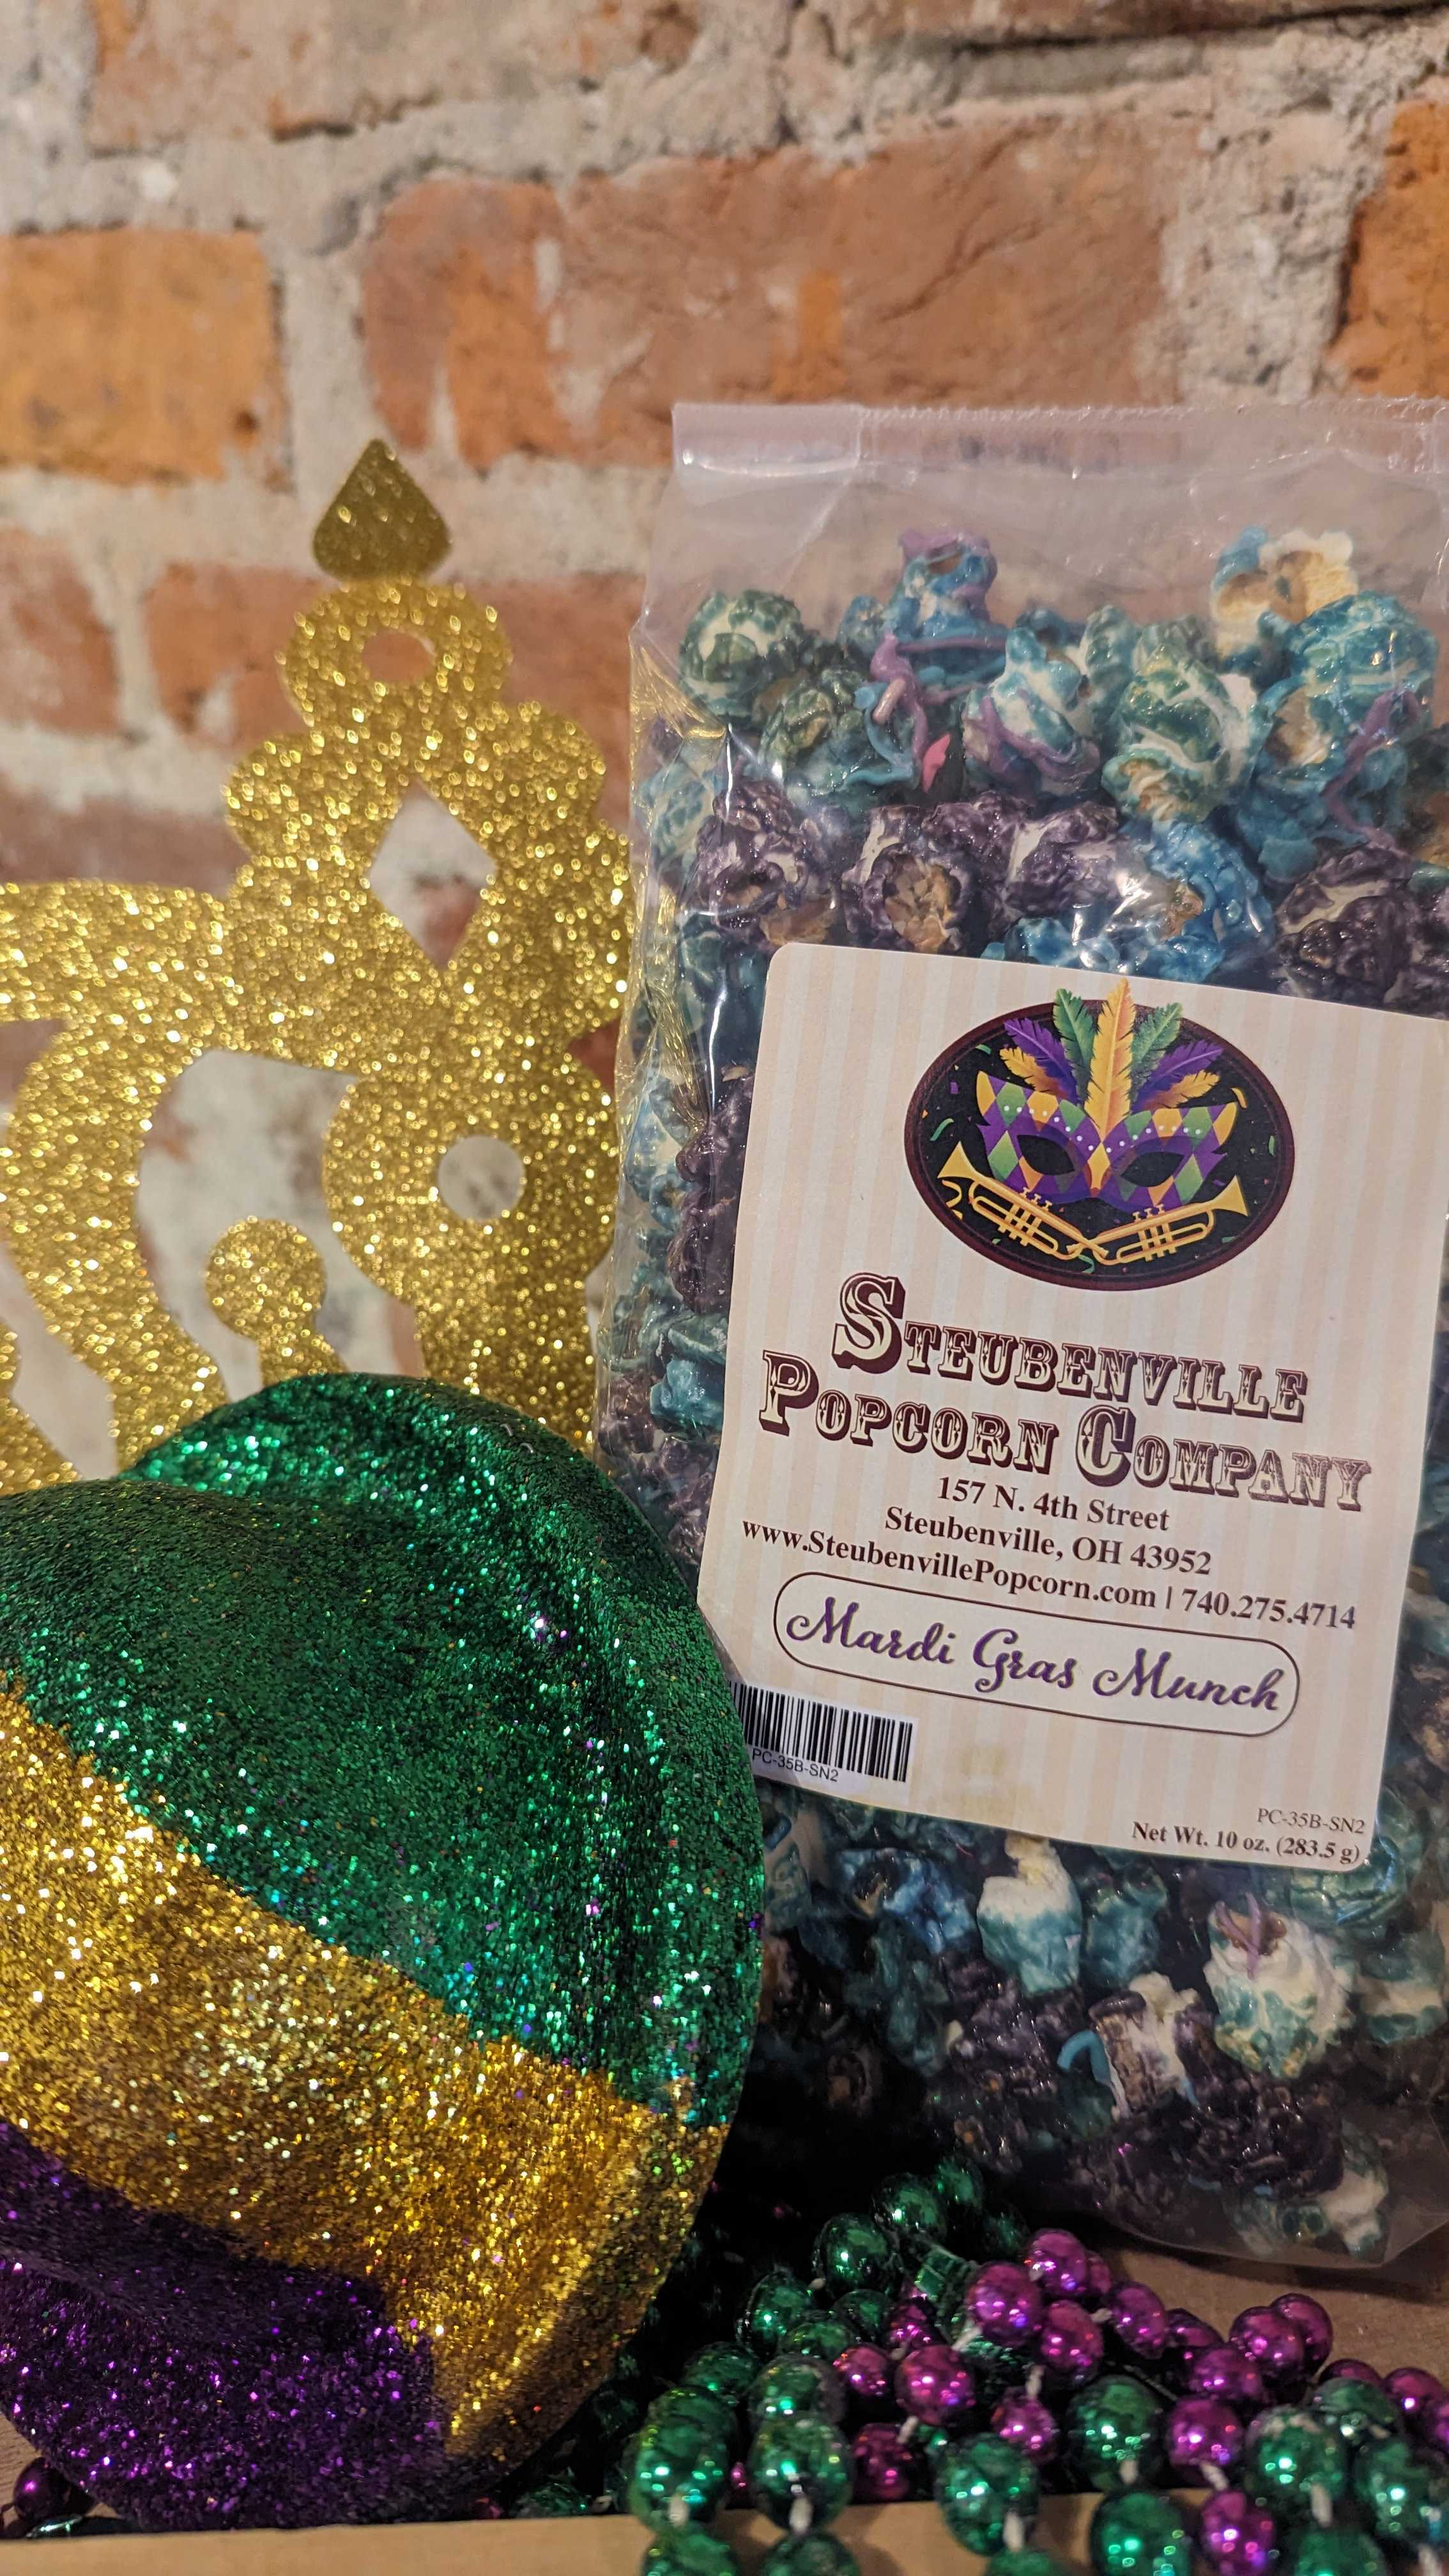 Mardi Gras Munch - Vanilla and candy drizzle